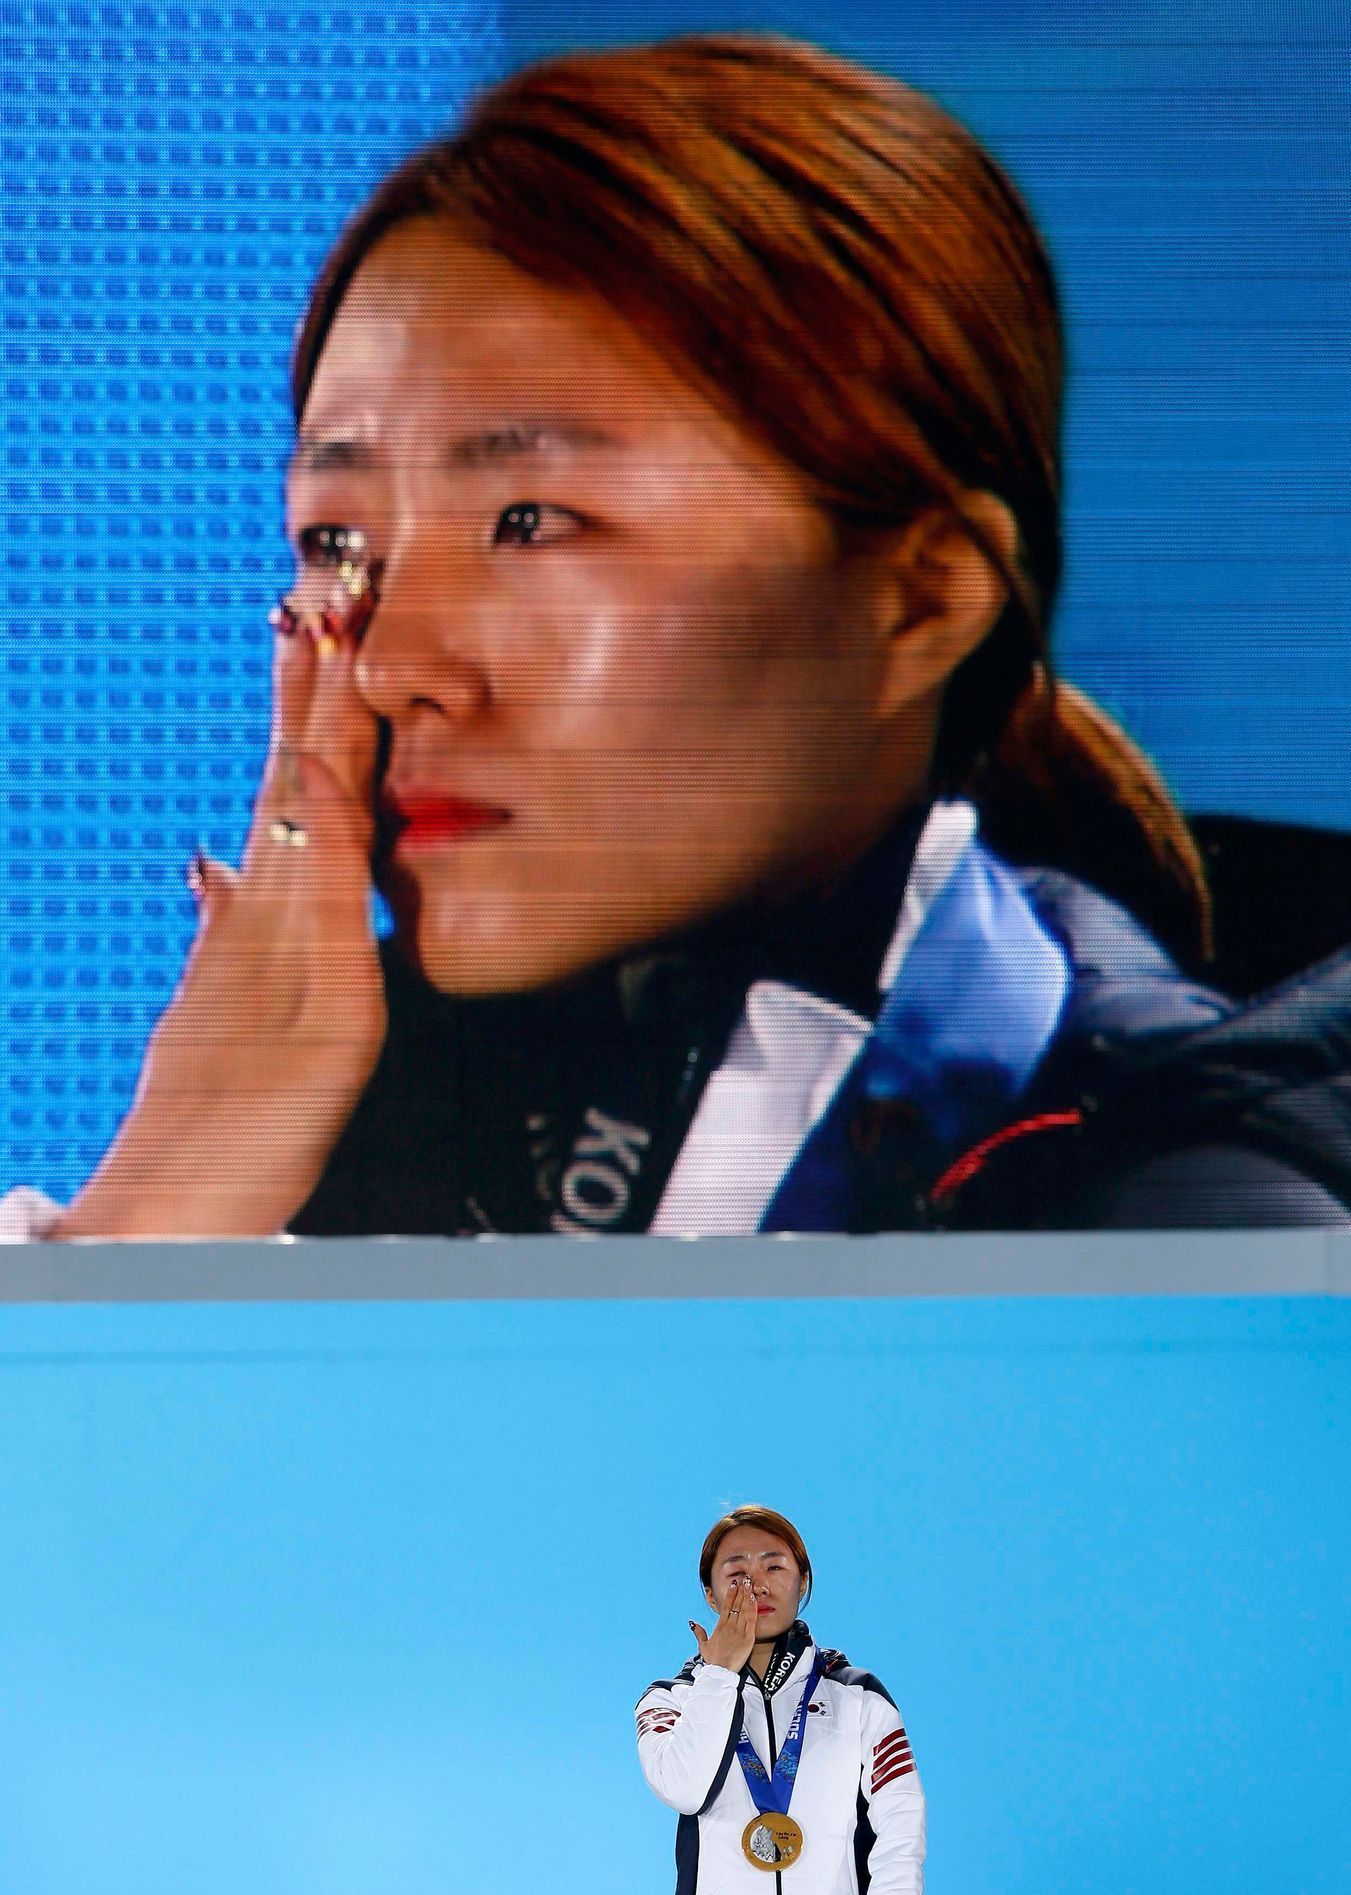 Gold medalist South Korea's Lee cries during the medal ceremony for the women's 500 meters speed skating competition at the Sochi 2014 Winter Olympic Games in Sochi